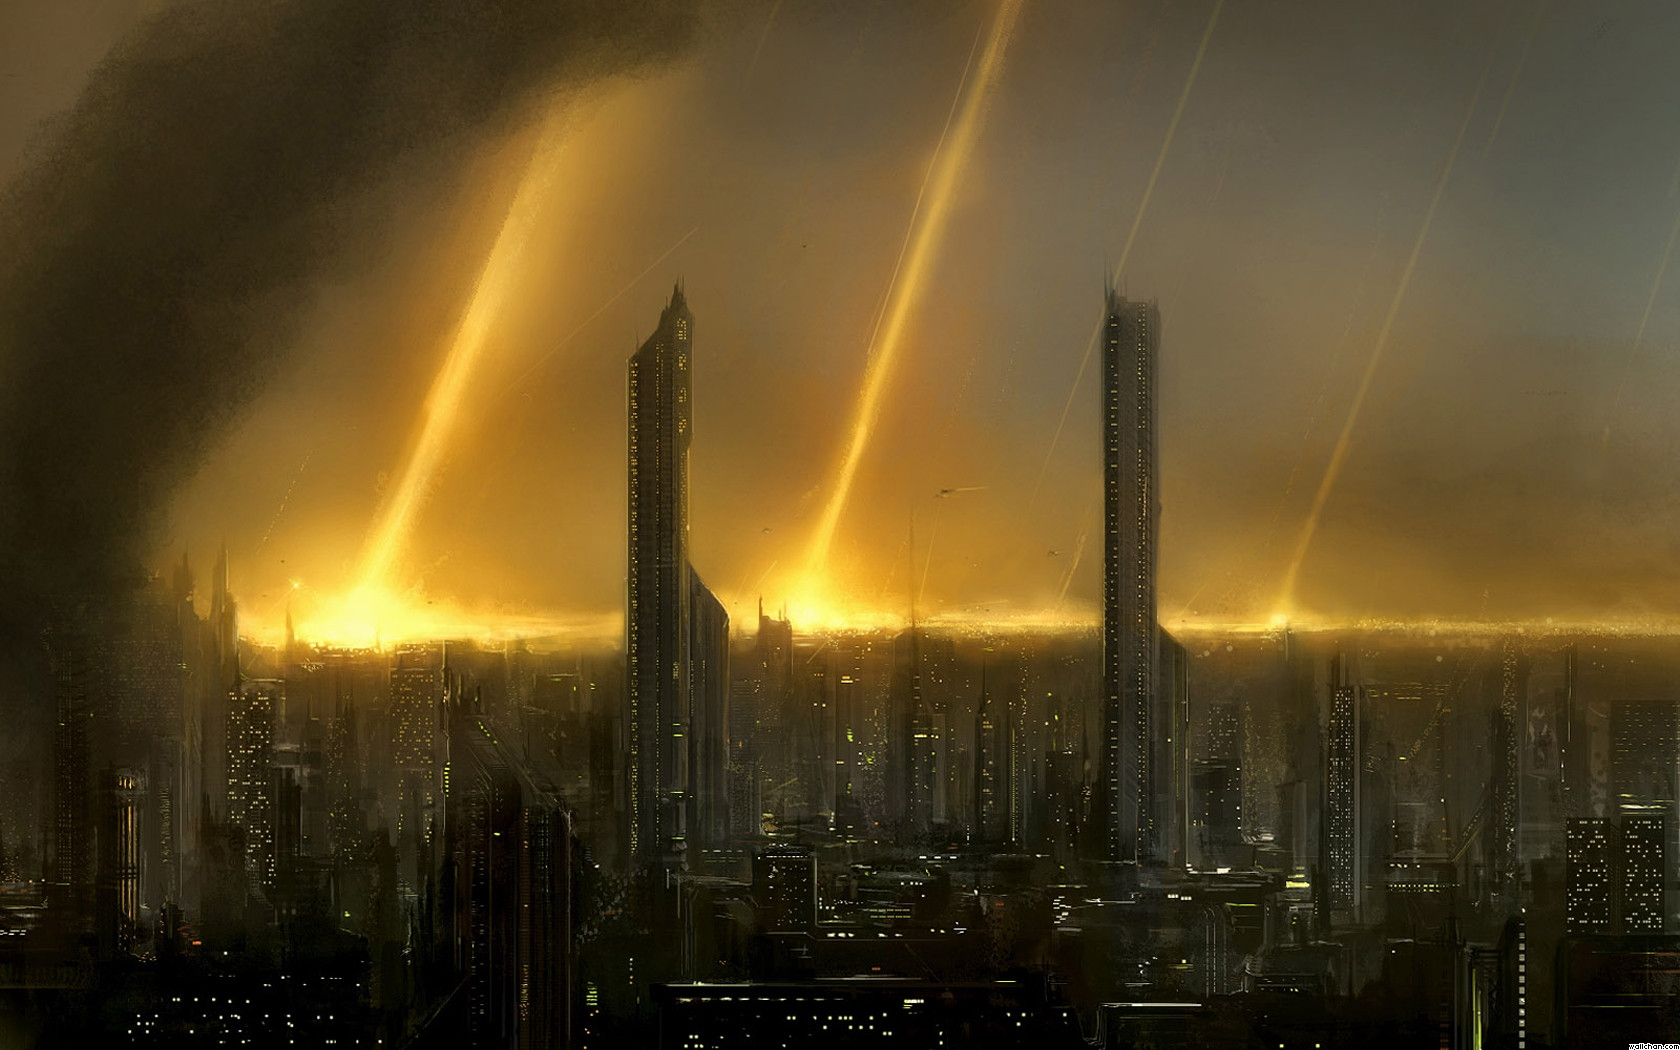 eve online, video game, apocalyptic, city, sci fi